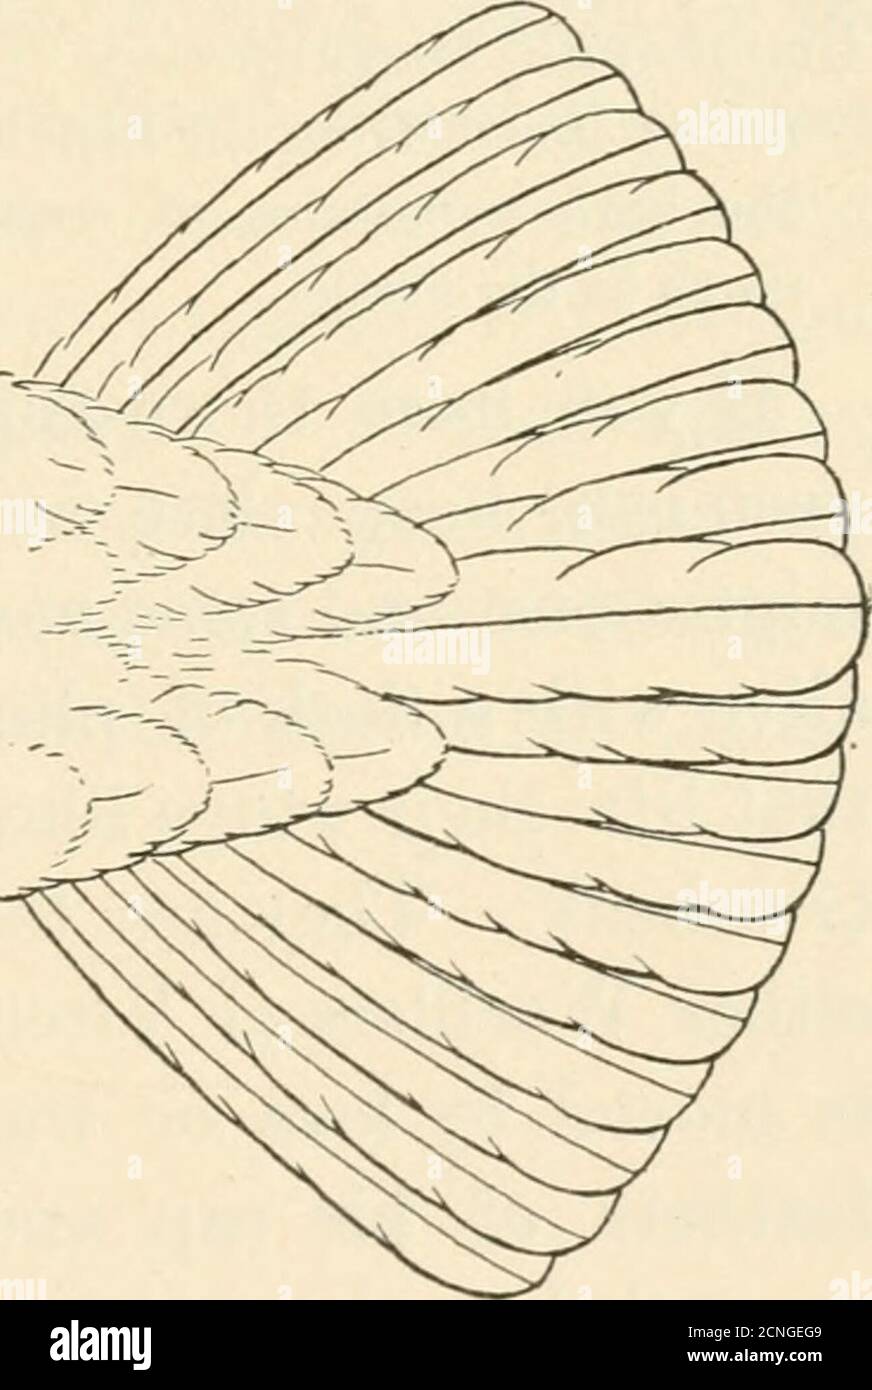 . Birds of village and field: a bird book for beginners . Fig. 213.Pointed tail of ISapsueker. Fig. 214. Awl-like tip of Swift tail feather.. Fig. 21(3.Fan-shaped tail of Ruffed Grouse 354 BUBY-CBOWNEB KINGLET tails. The list stands now: 1. Flycatchers. 2.Larks. 3. Crows and Jays. 4. Blackbirds andOrioles. 5. Finches and Sparrows. 6. Tanagers.7. Swallows. 8. Waxwings. 9. Shrikes. 10.Vireos. 11. Wood Warblers. 12. Pipits. 13.Thrashers, Wrens, Catbirds. 14. Creepers. 15.Nuthatches and Titmice. Ruby-crowned Kinglet: Regulus calendula.(See Fig. 218, p. 356.) Adult male, crown with concealed scarle Stock Photo